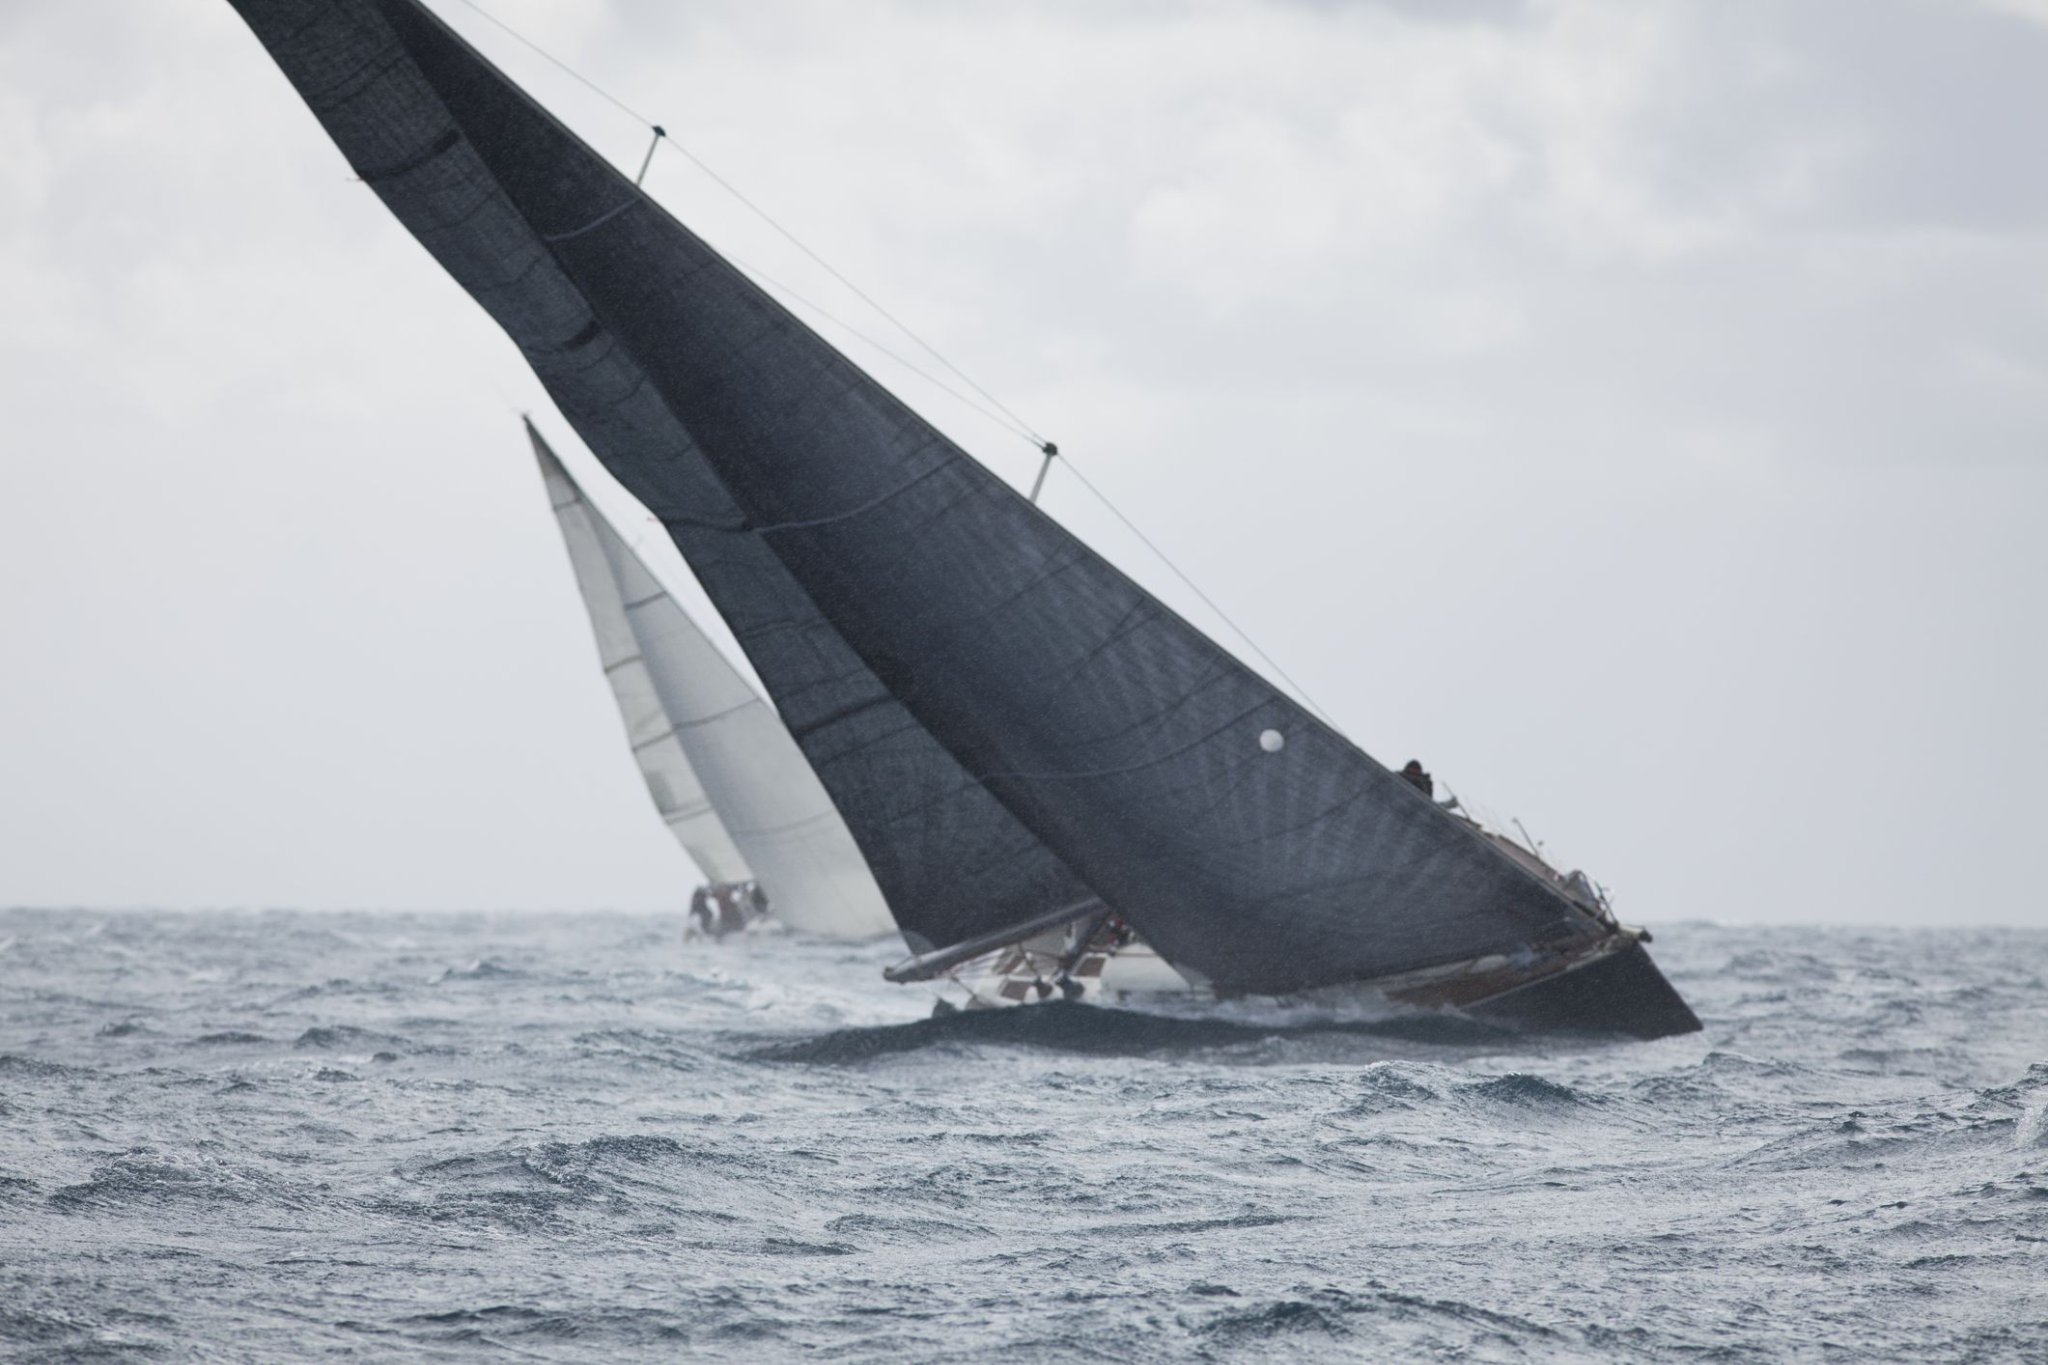 Know How to Stay Safe in Heavy Weather Sailing